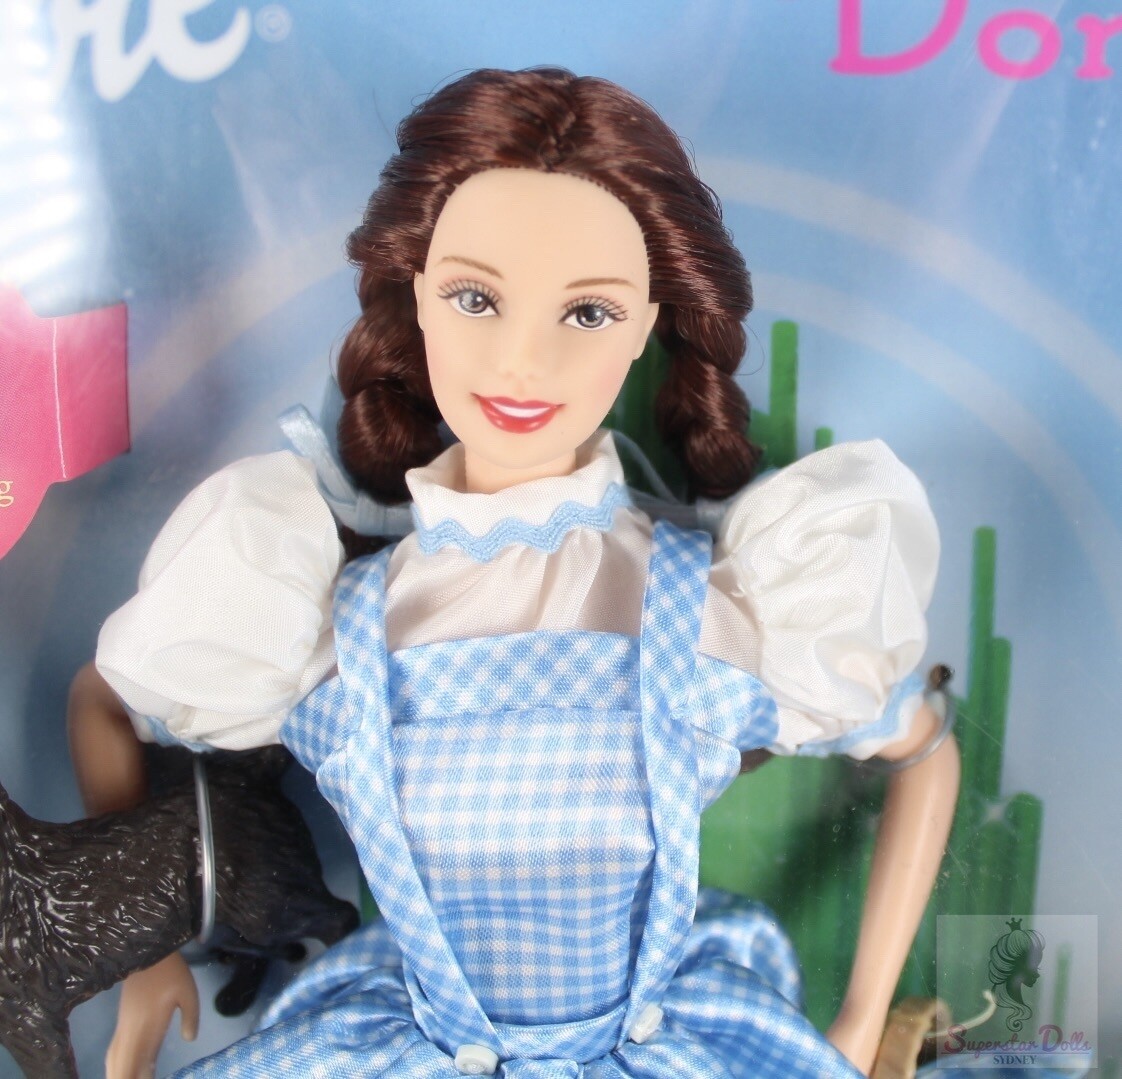 1999 Barbie as Dorothy from The Wizard of Oz Doll